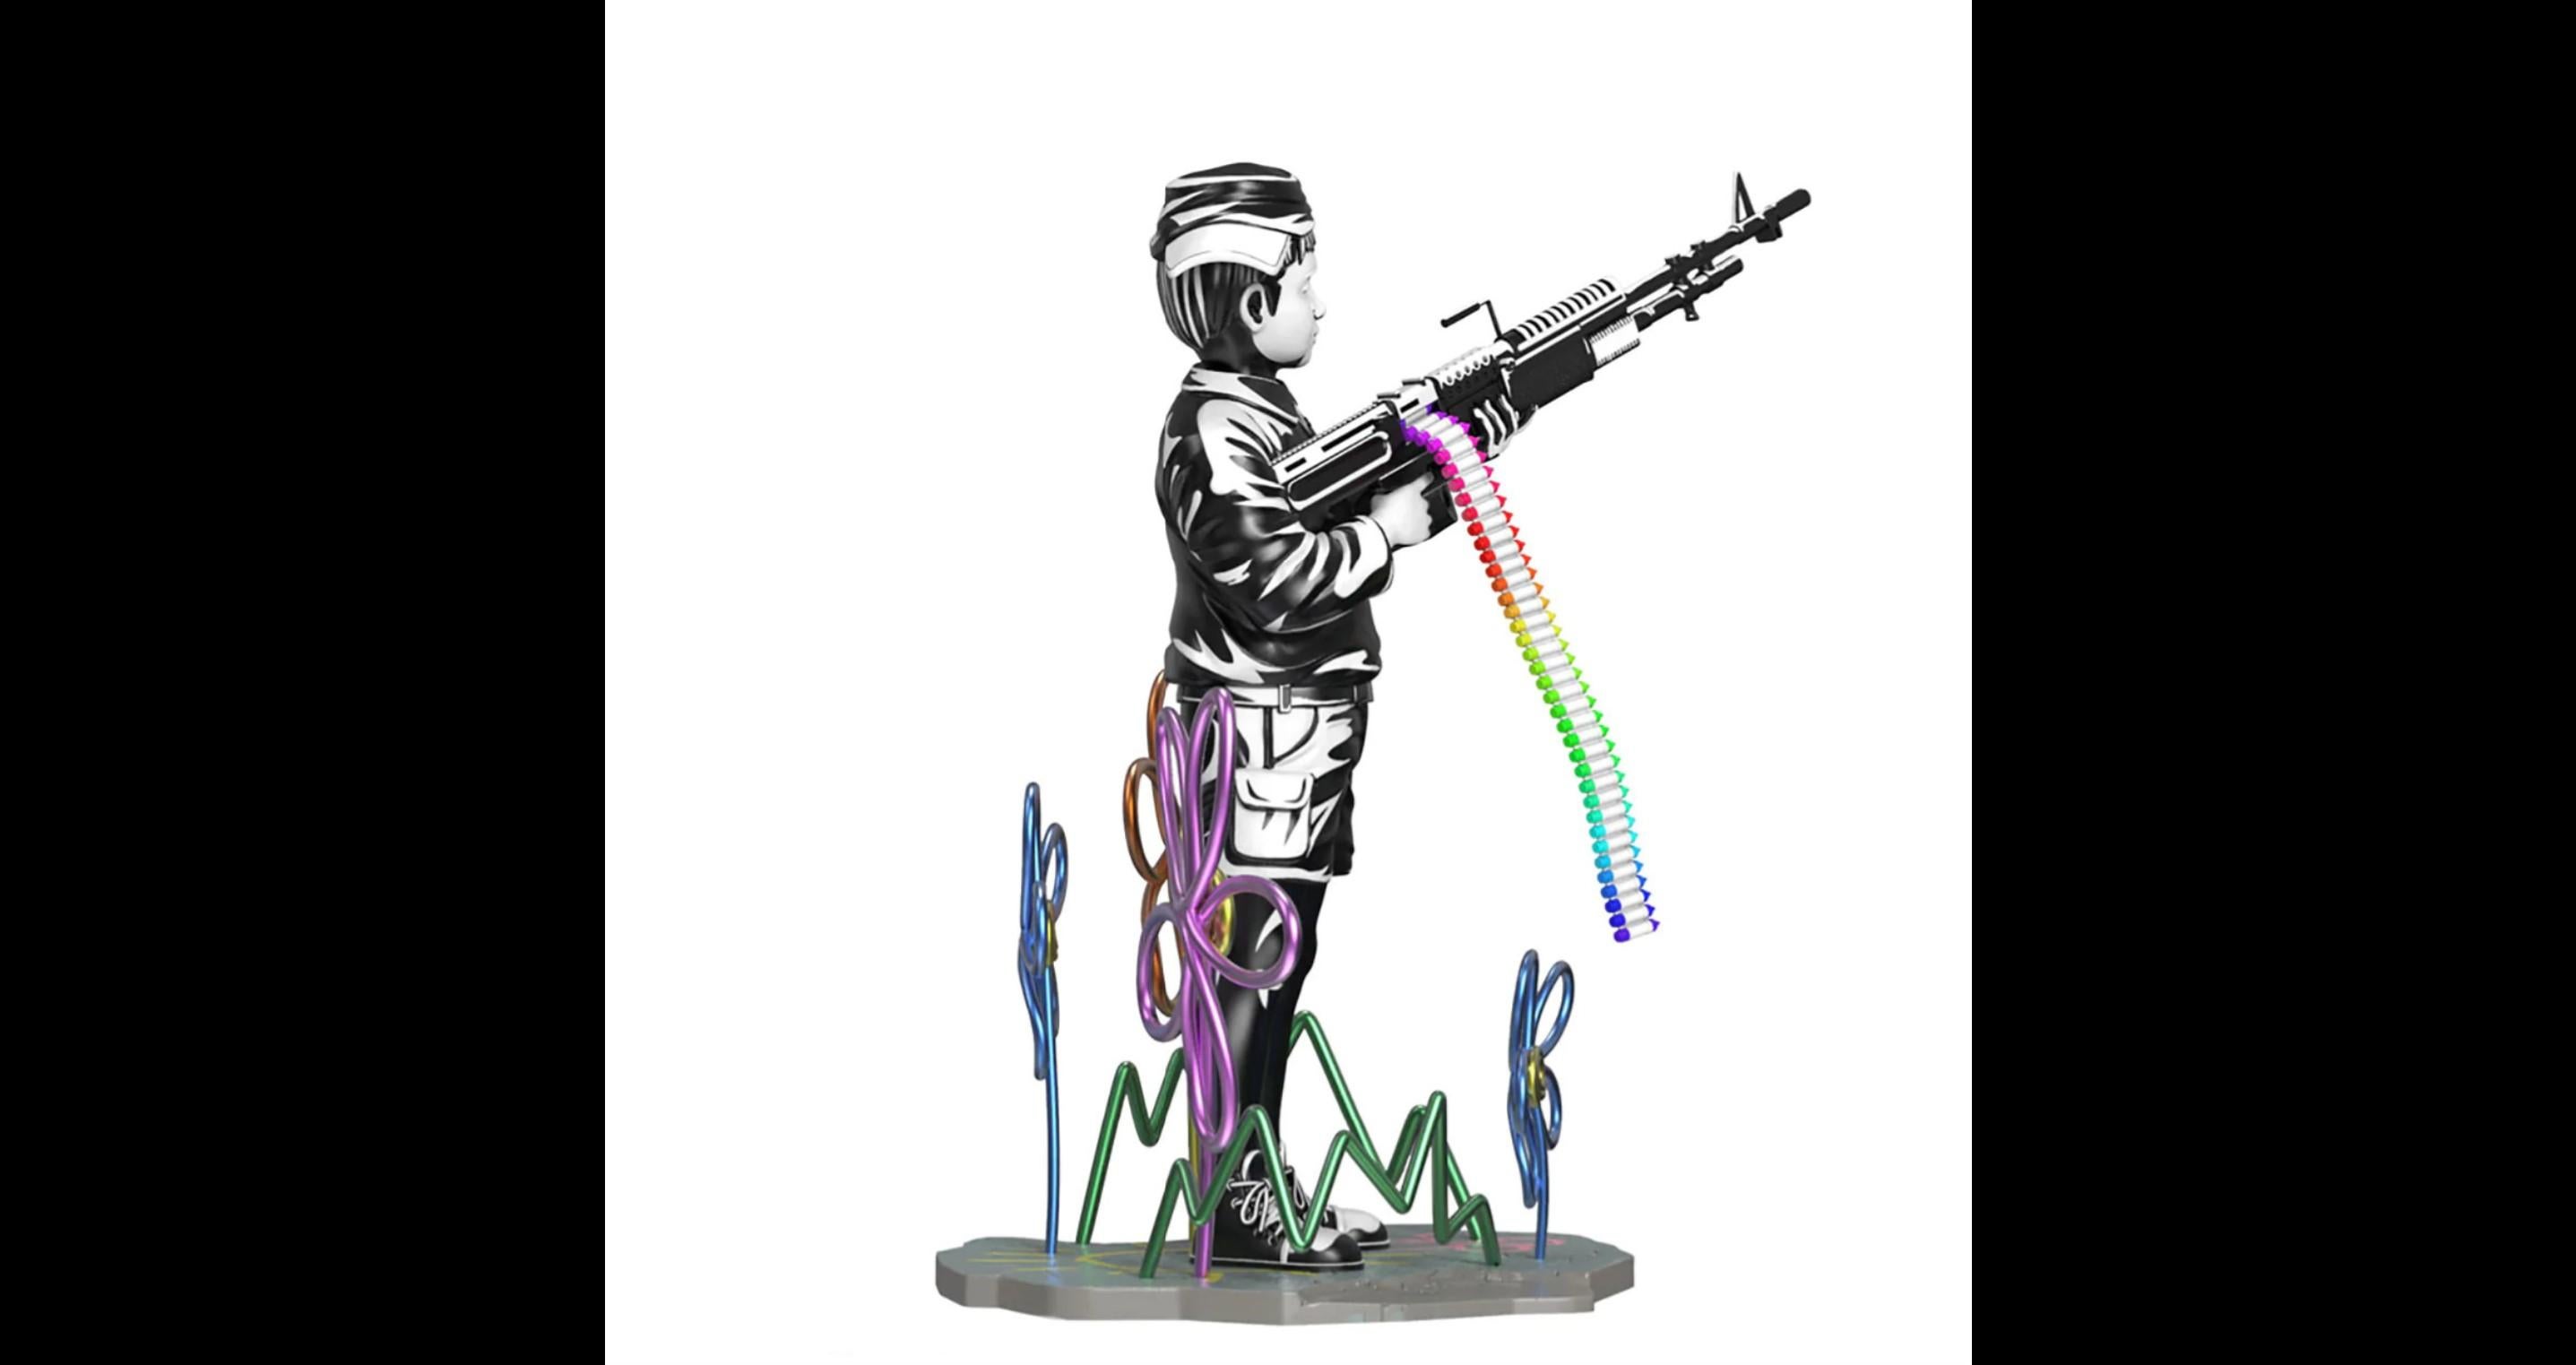 This limited edition designer art sculpture is a collaboration between Brandalised and Mighty Jaxx, based on Banksy's iconic 